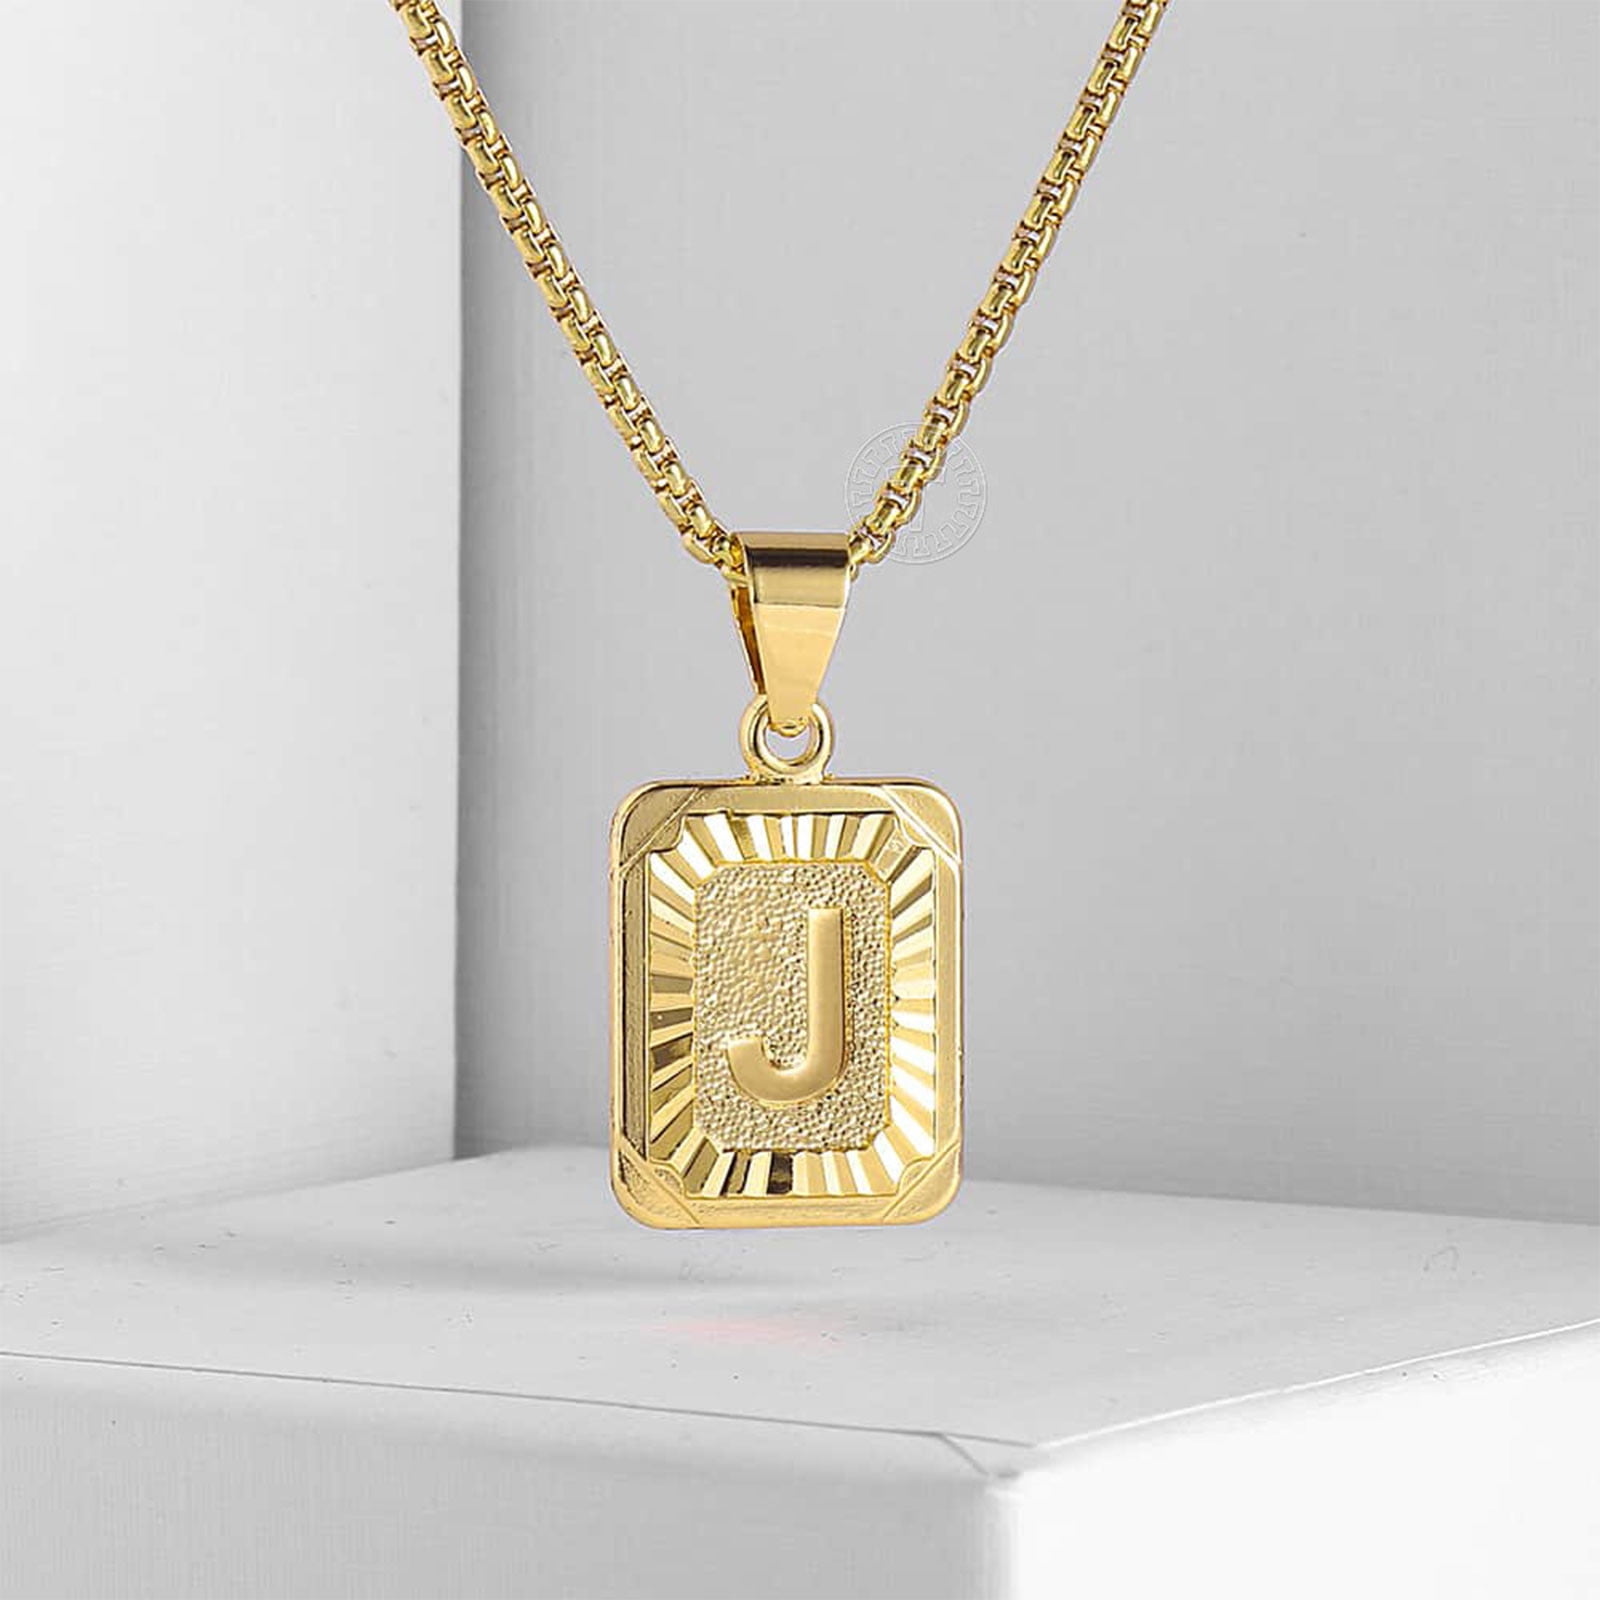 The Must Have Initial Necklace 14K Gold Filled • EFYTAL Jewelry